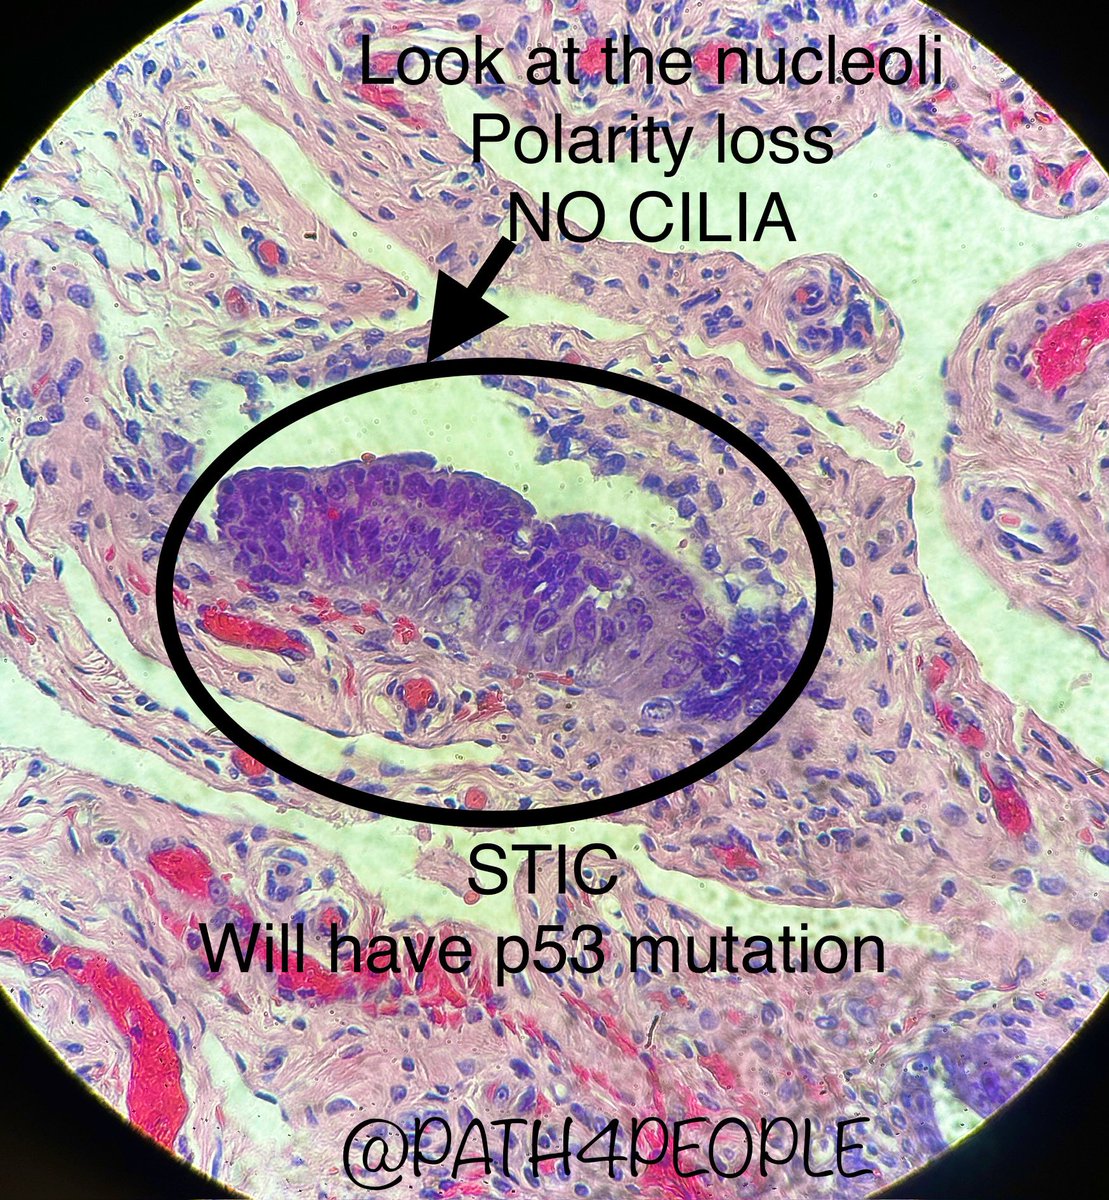 STIC 

Found in the fallopian tube and precursor to high grade tuboovarian serous carcinoma

Women who have #BRCA mutations are at high risk (that’s why their ovaries and fallopian tubes are prophylactically removed #angelinajolie)

#pathtwitter #gyntwitter #medtwitter @Path_SIG